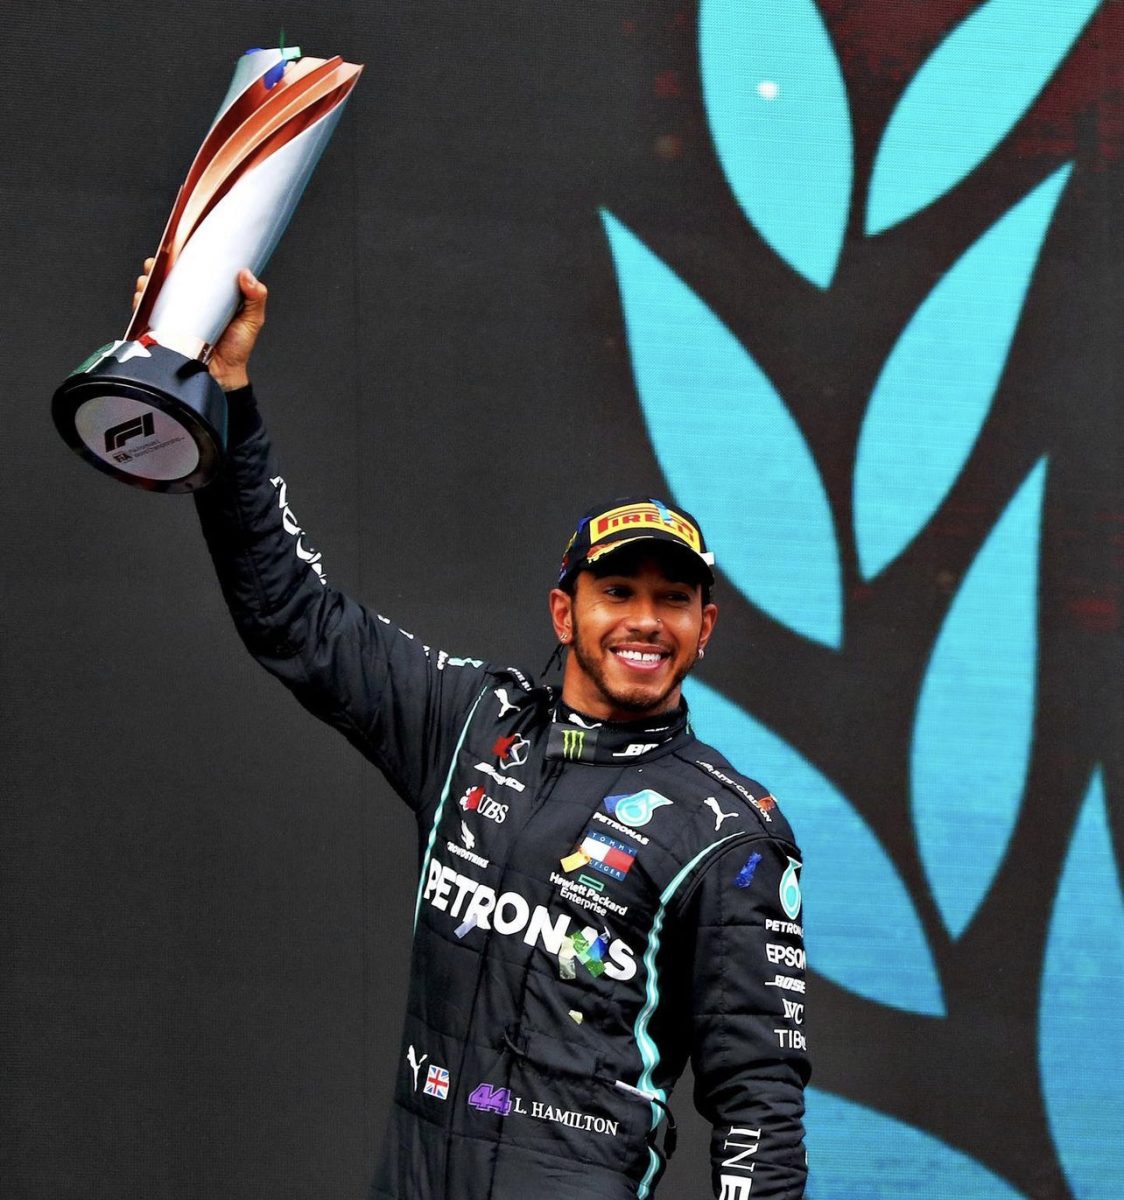 Hamilton+recently+shocked+the+sports+world+by+announcing+his+departure+from+Mercedes.+%28Courtesy+of+Instagram%29